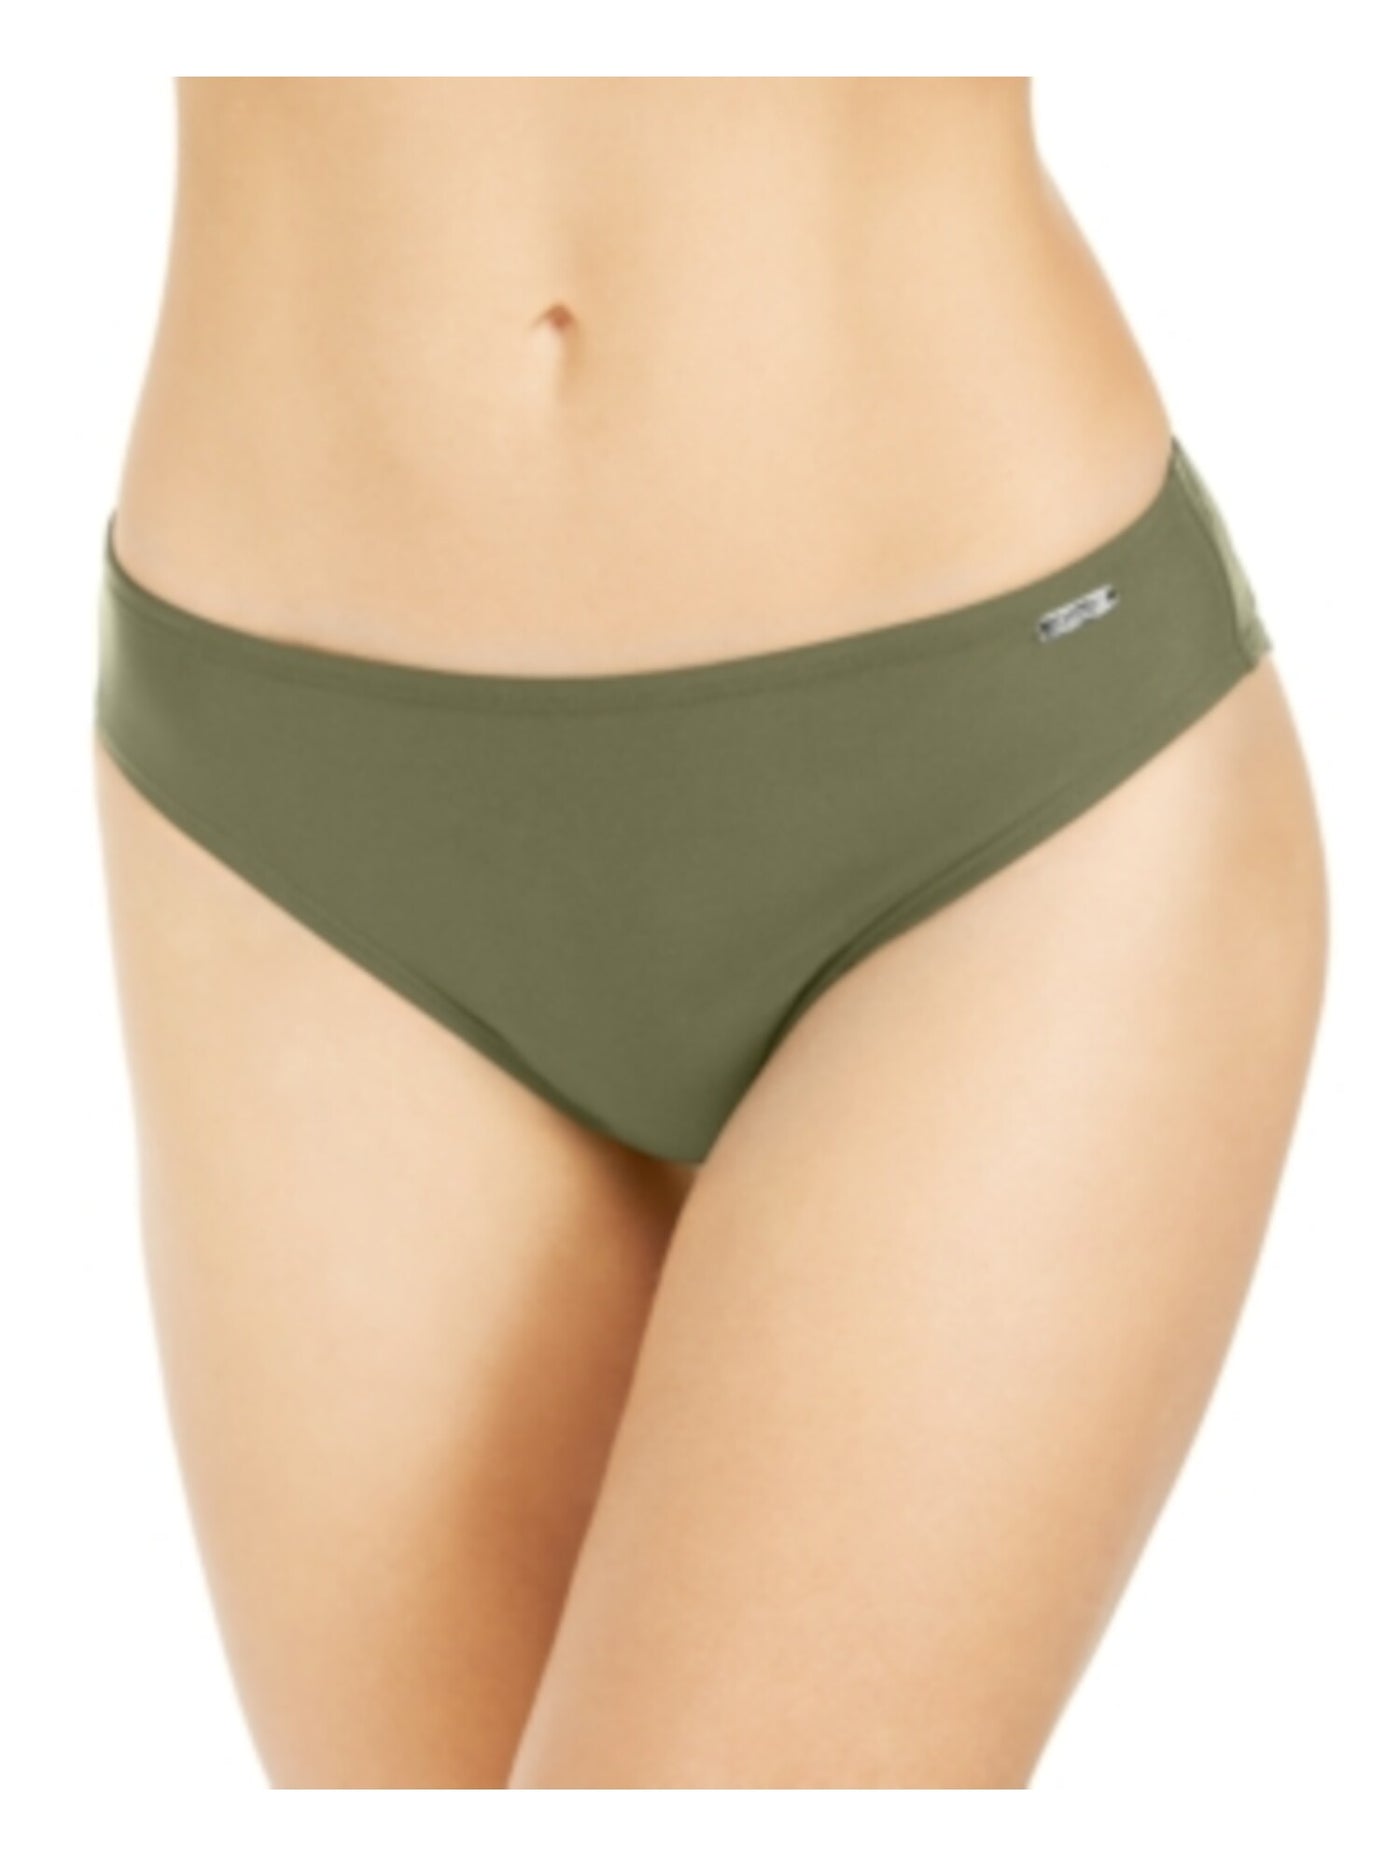 DKNY Women's Green Stretch Lined Full Coverage UV Protection Hipster Swimsuit Bottom XS